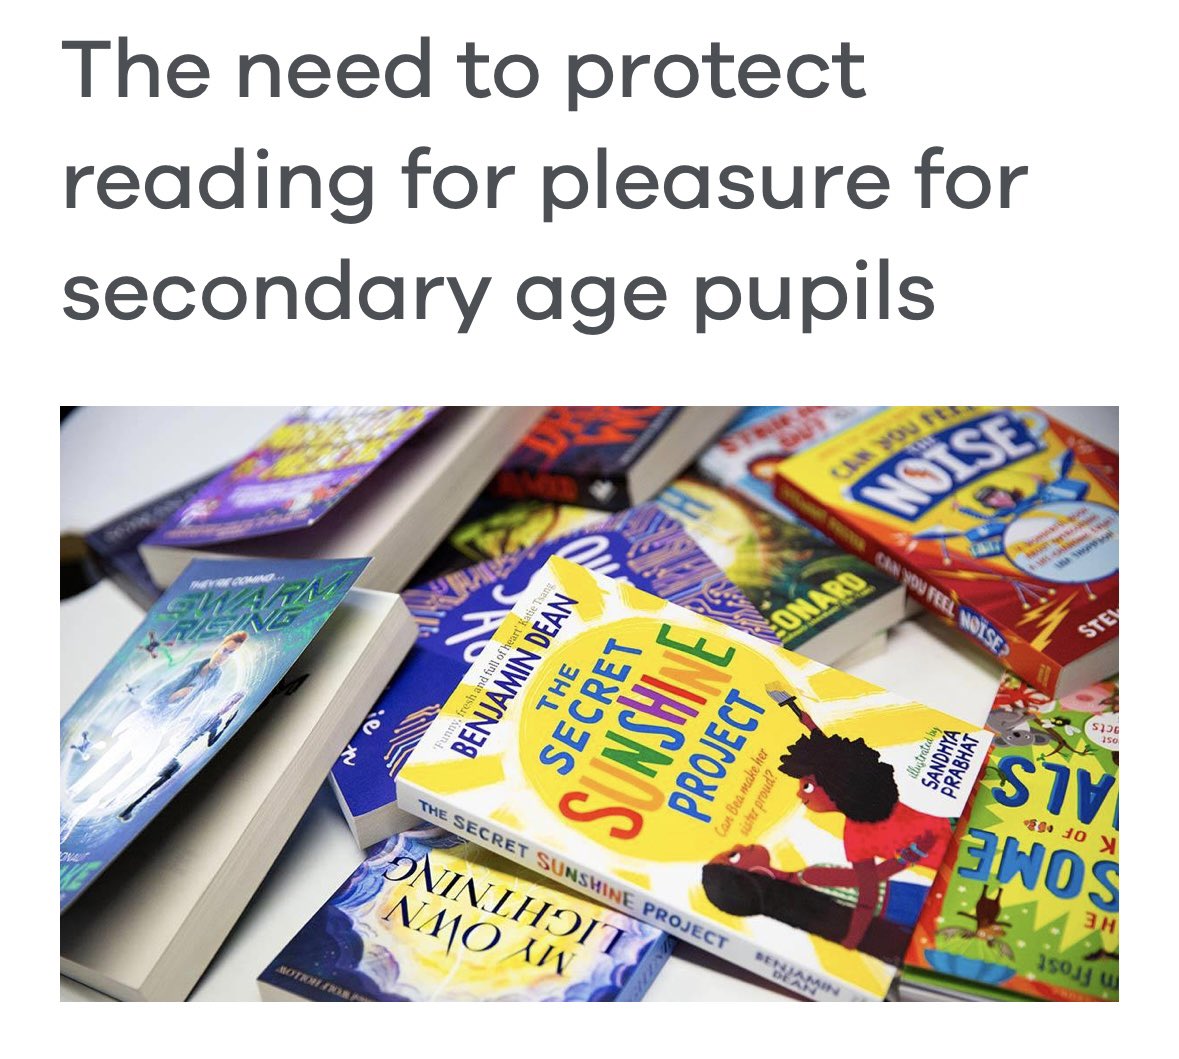 Michelle, a secondary school librarian, @Booktrust shares her expertise on getting the right books into students' hands. The need to protect reading for pleasure for secondary age pupils #Reading #OpeningGateways booktrust.org.uk/news-and-featu…